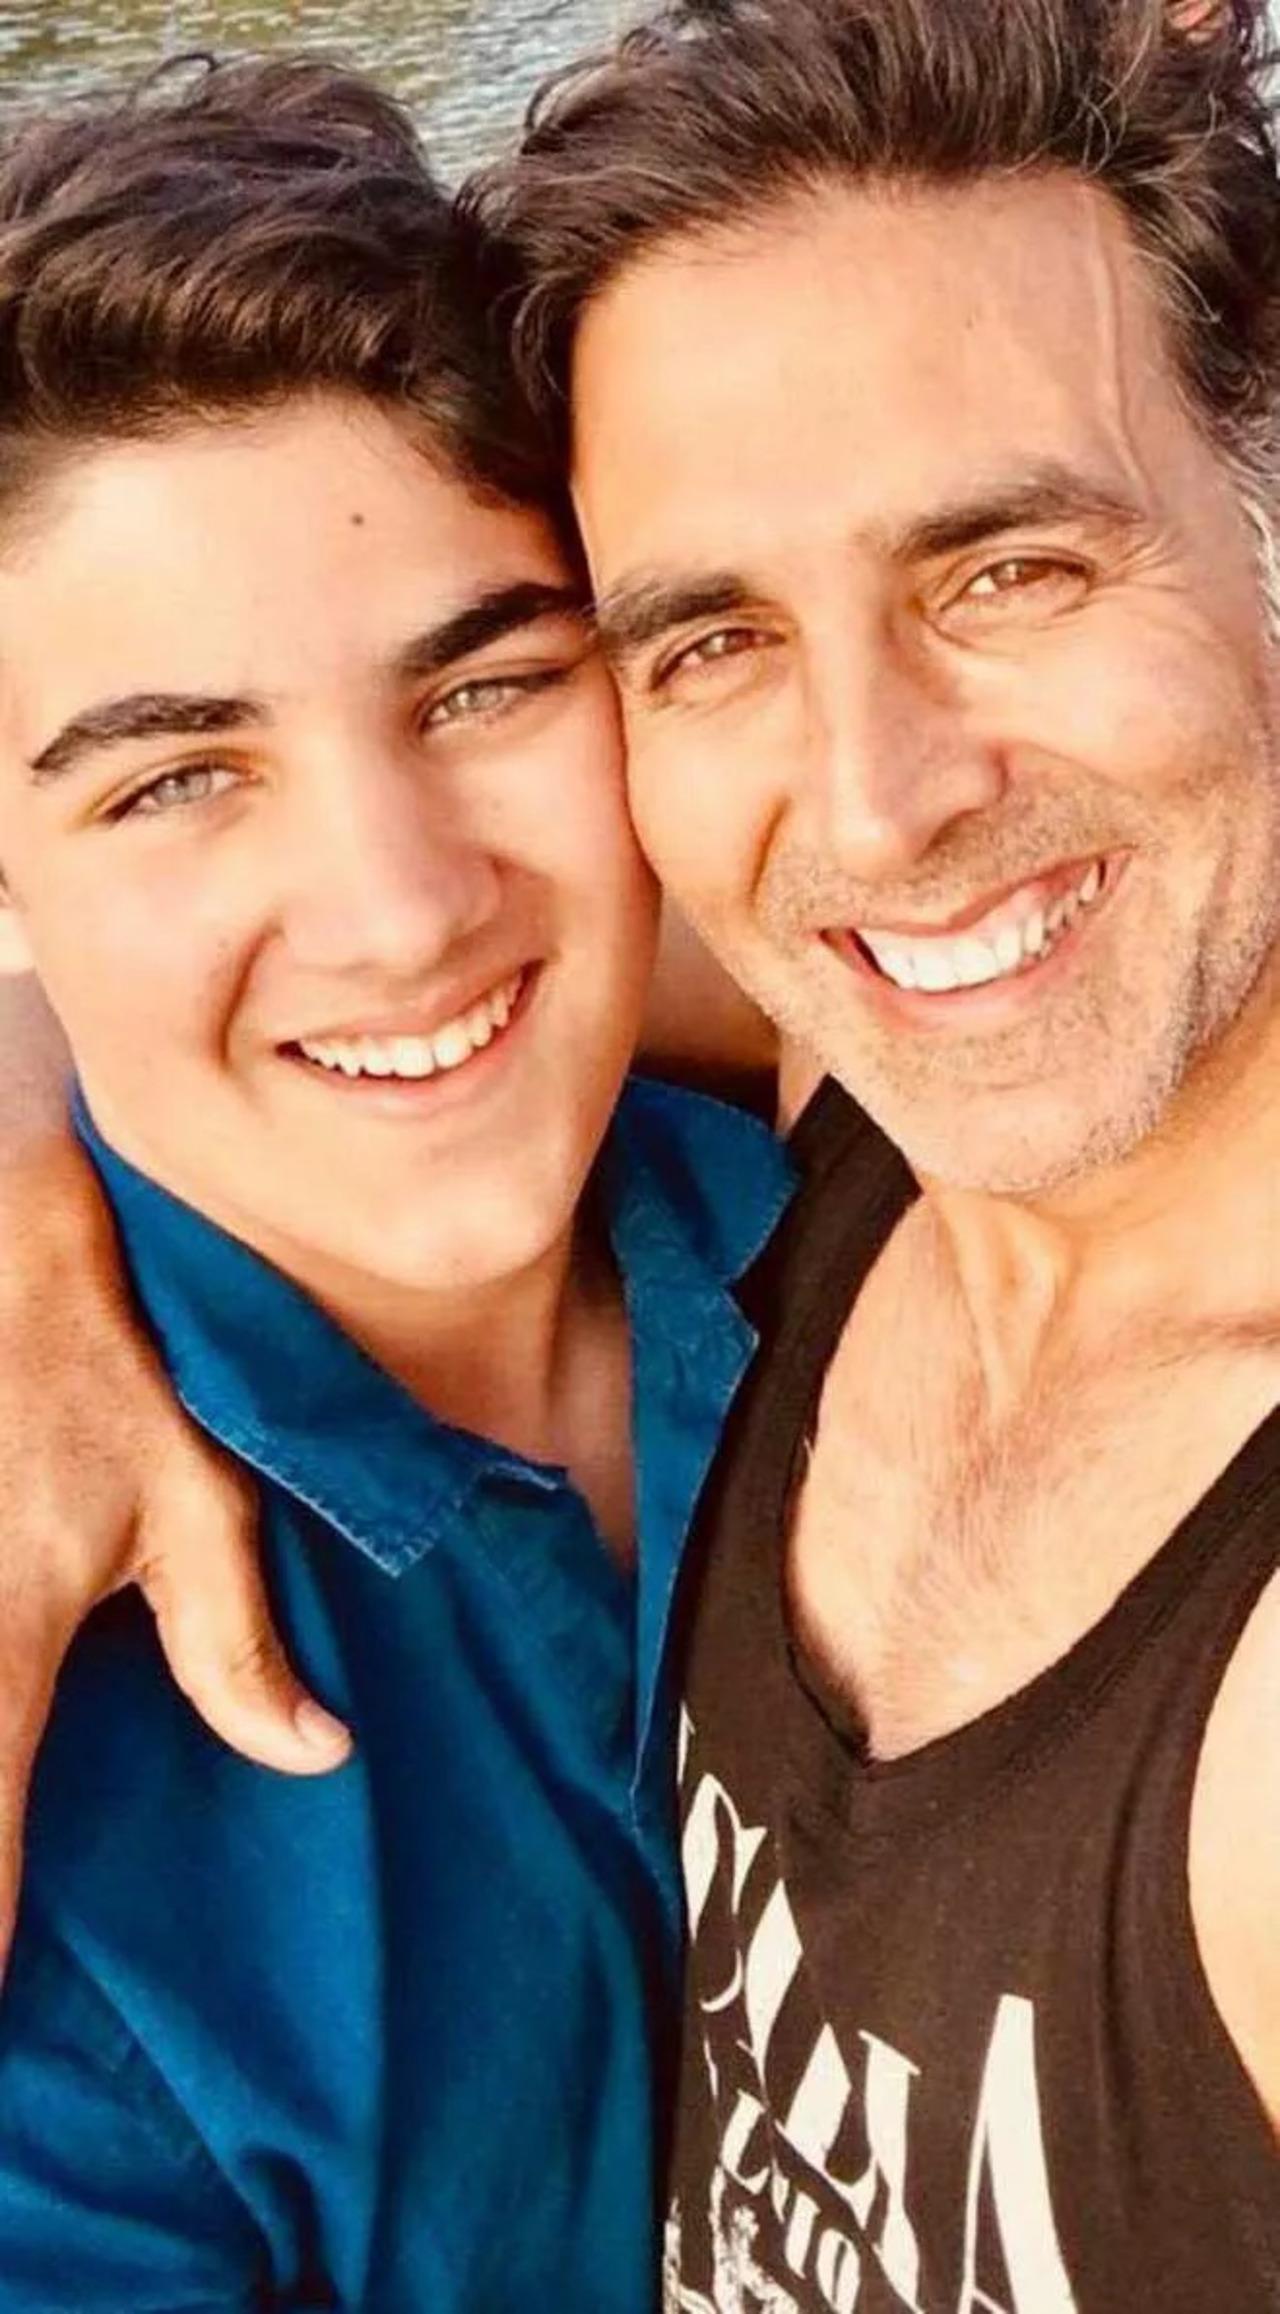 Akshay Kumar and Twinkle Khanna's son Aarav Bhatia is a dapper lad. While he keeps himself away from the media's attention, his parents have spoken about him and his career preferences in interviews. The couple also has a daughter named Nitara